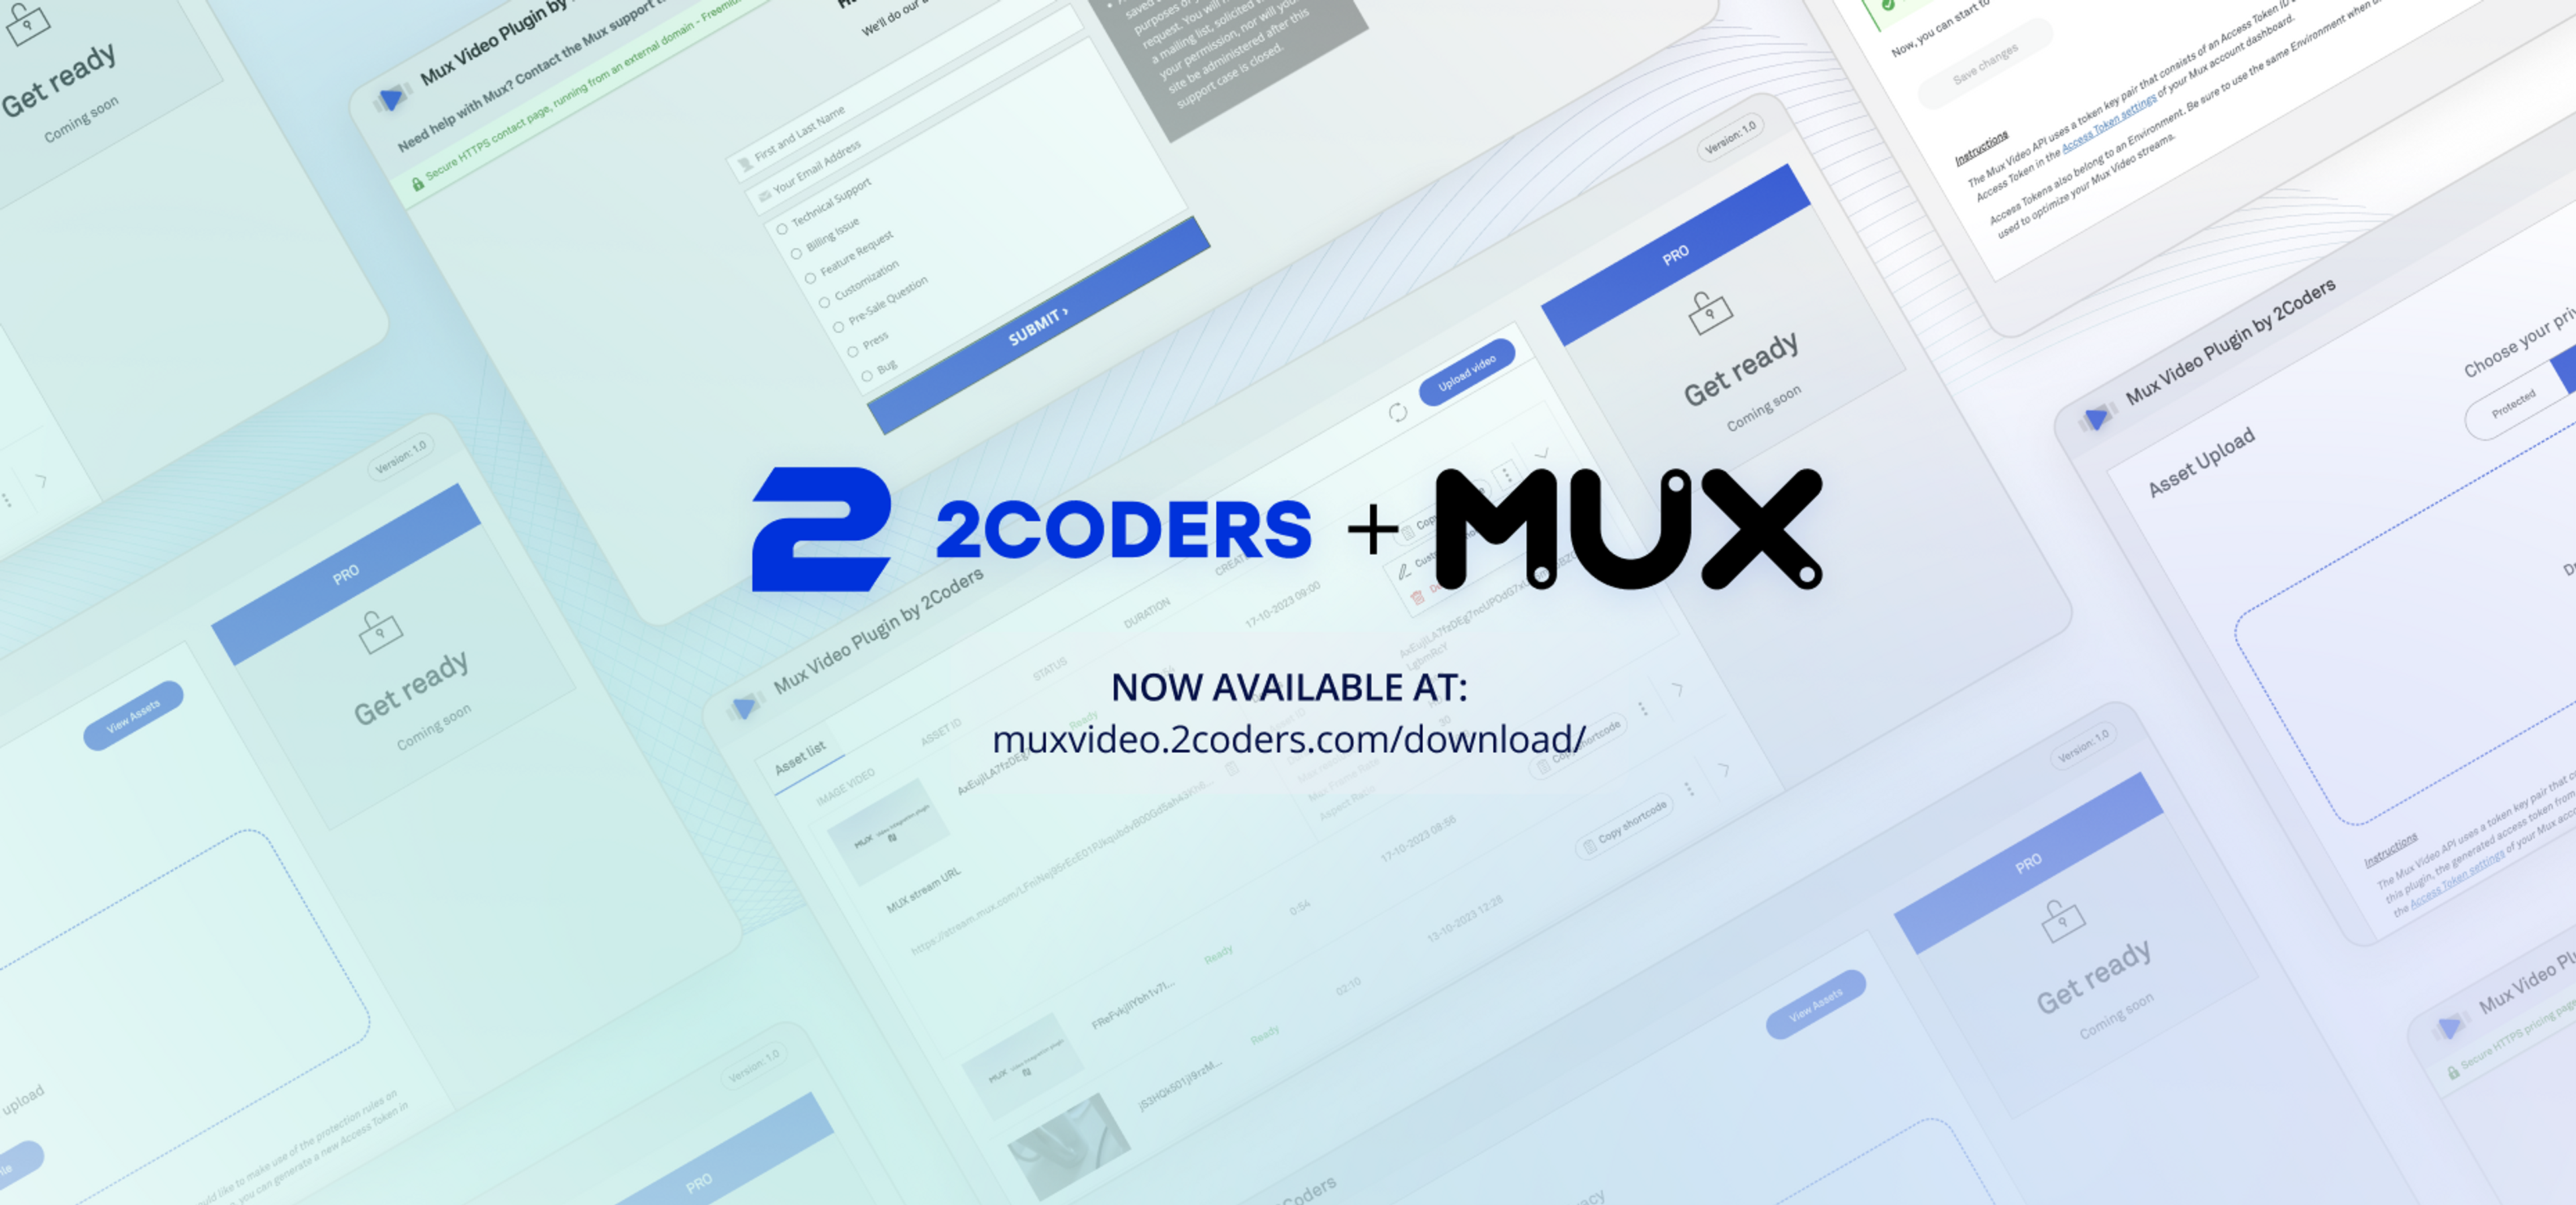 An illustration showing the 2Coders logo and the Mux logo next to each other, representing the companies' partnership.